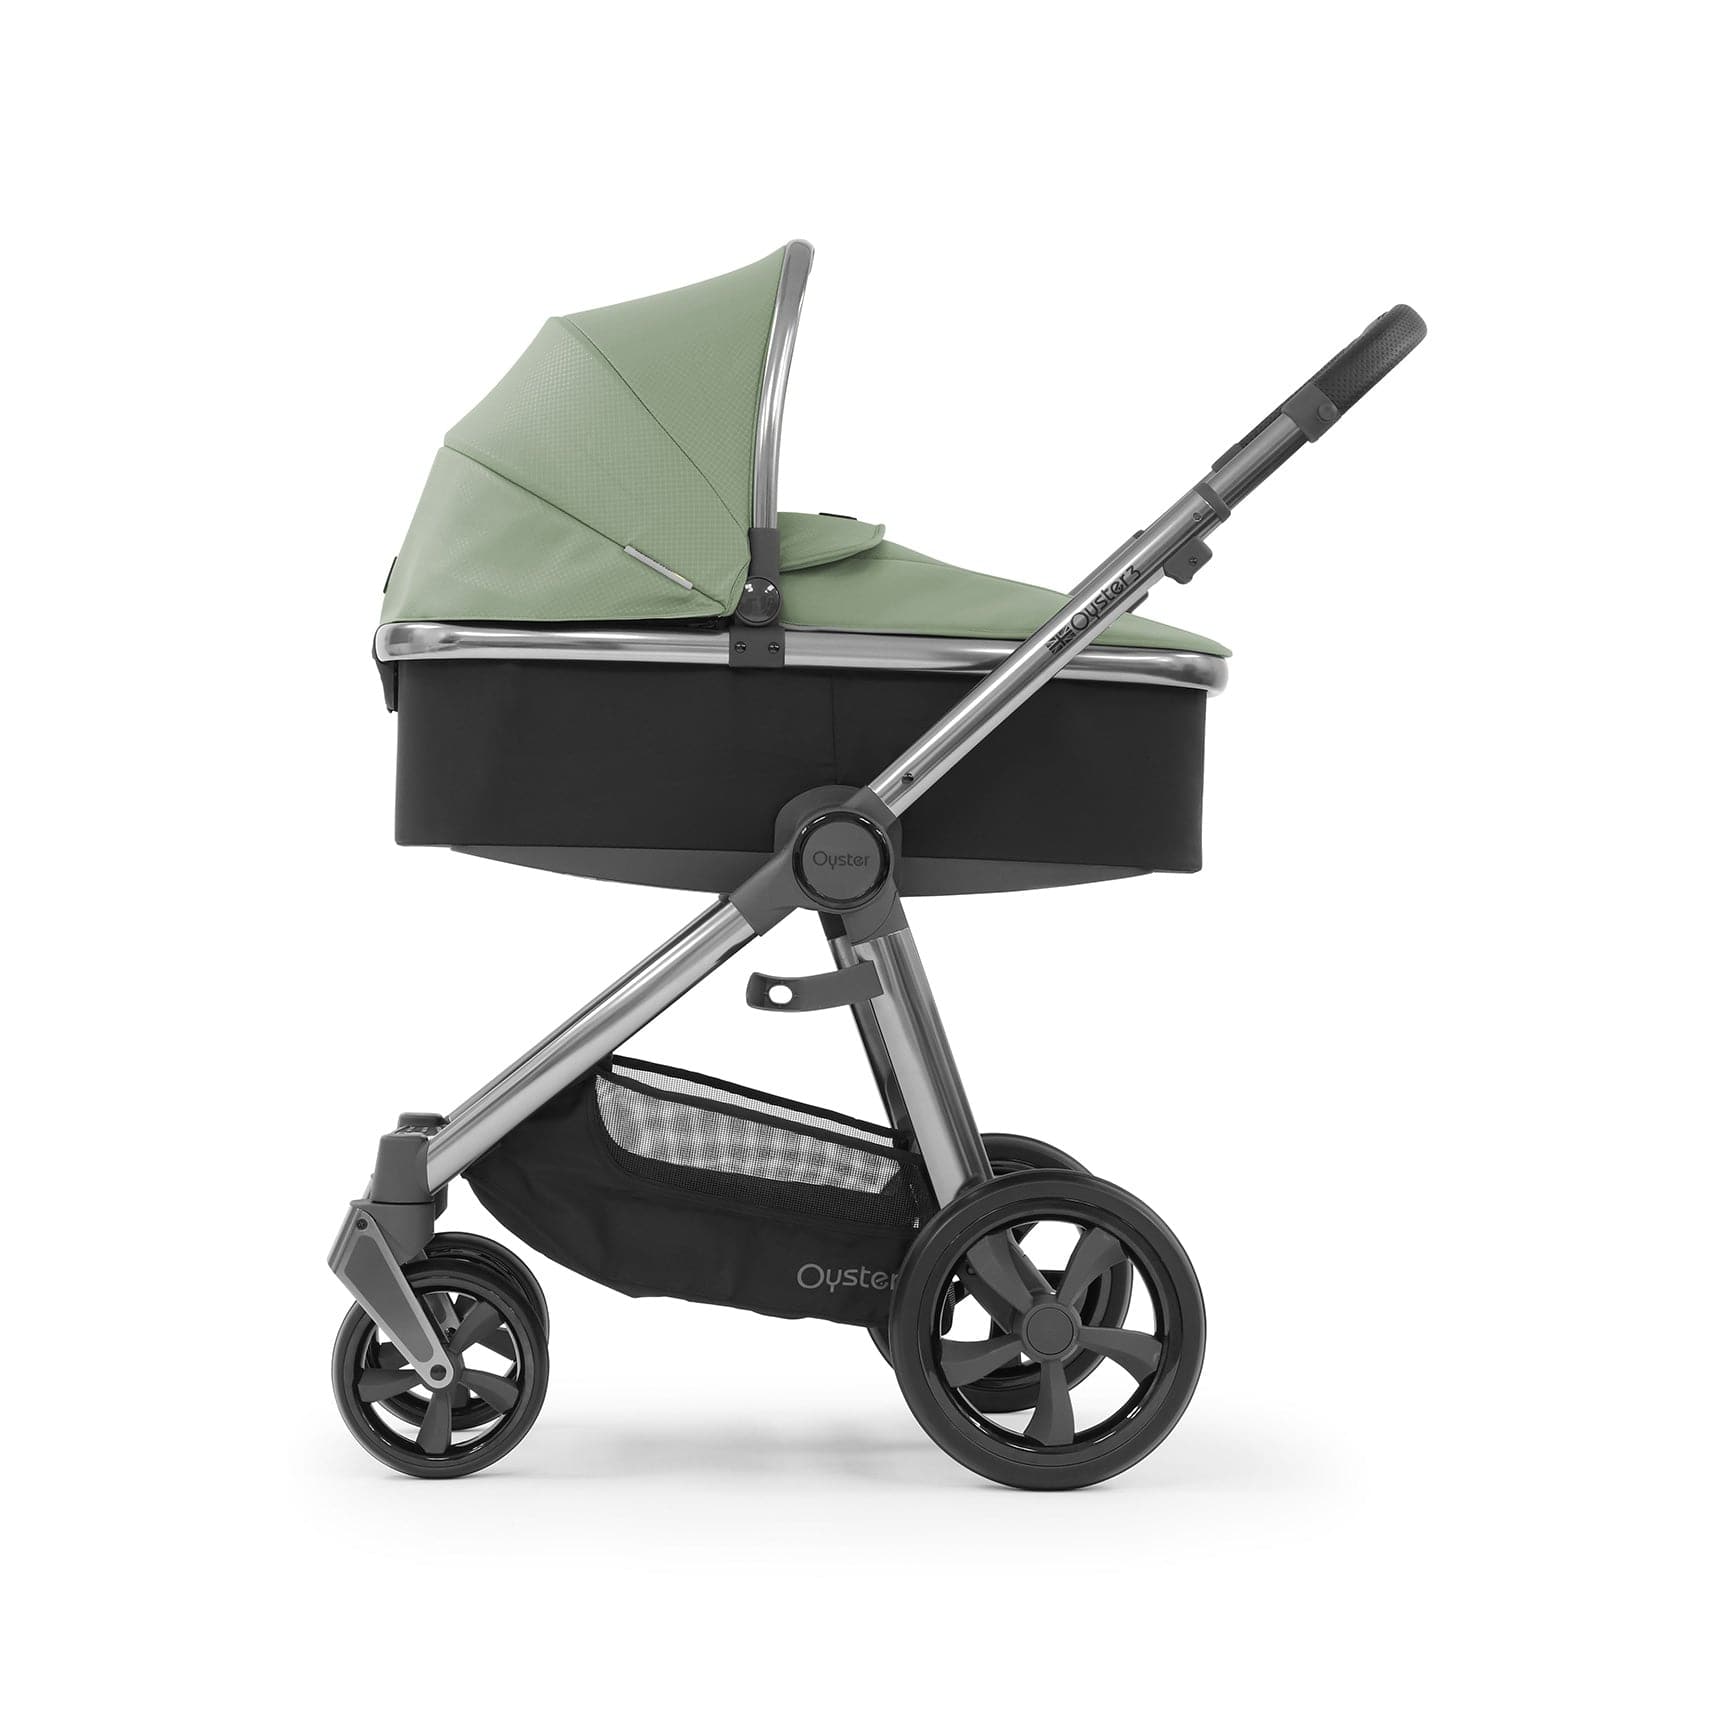 BabyStyle baby prams BabyStyle Oyster3 Pram & Carrycot Spearmint